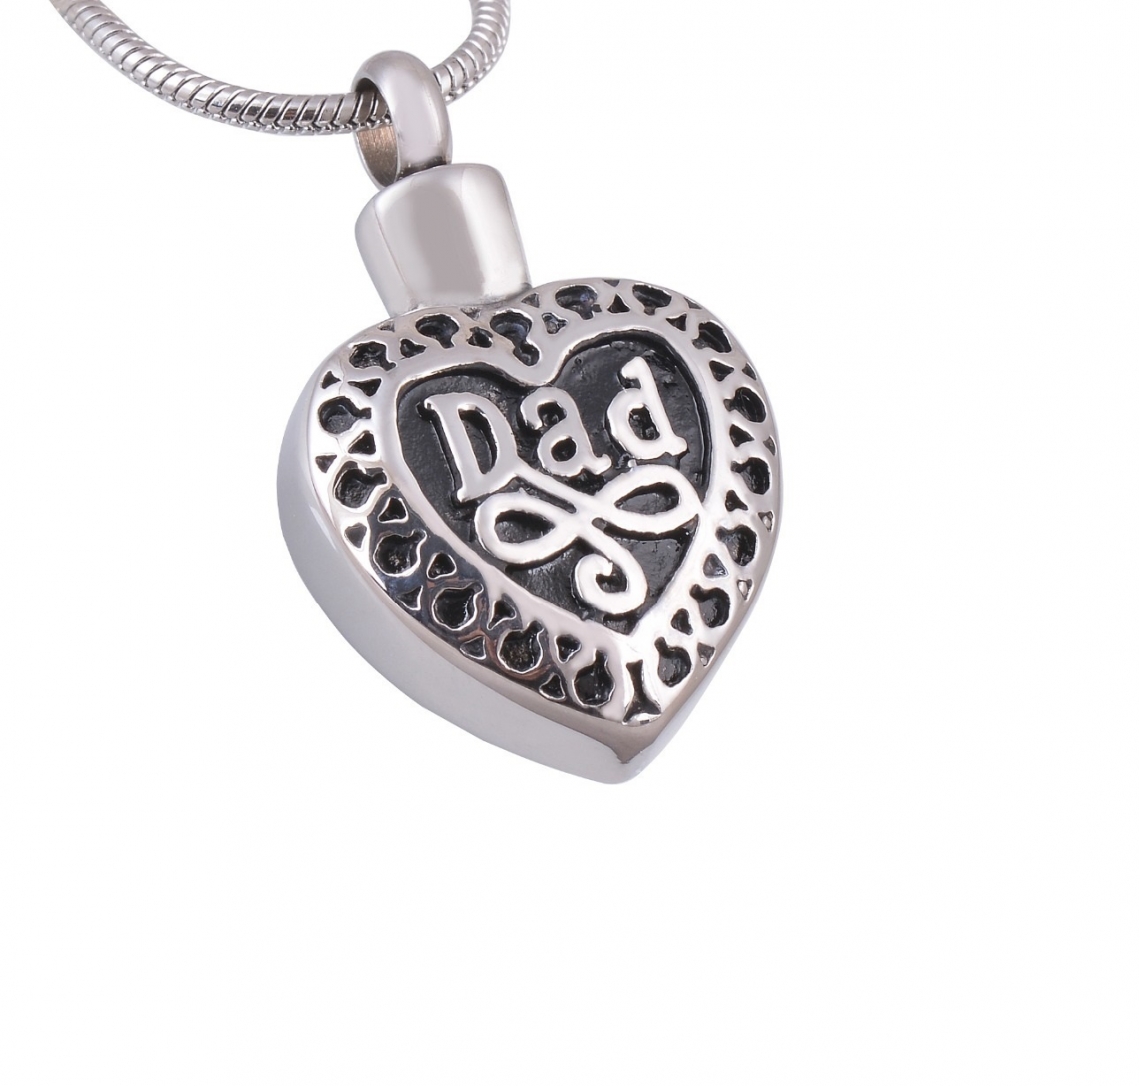 Dad Heart - Stainless Steel Cremation Ashes Jewellery Urn Pendant